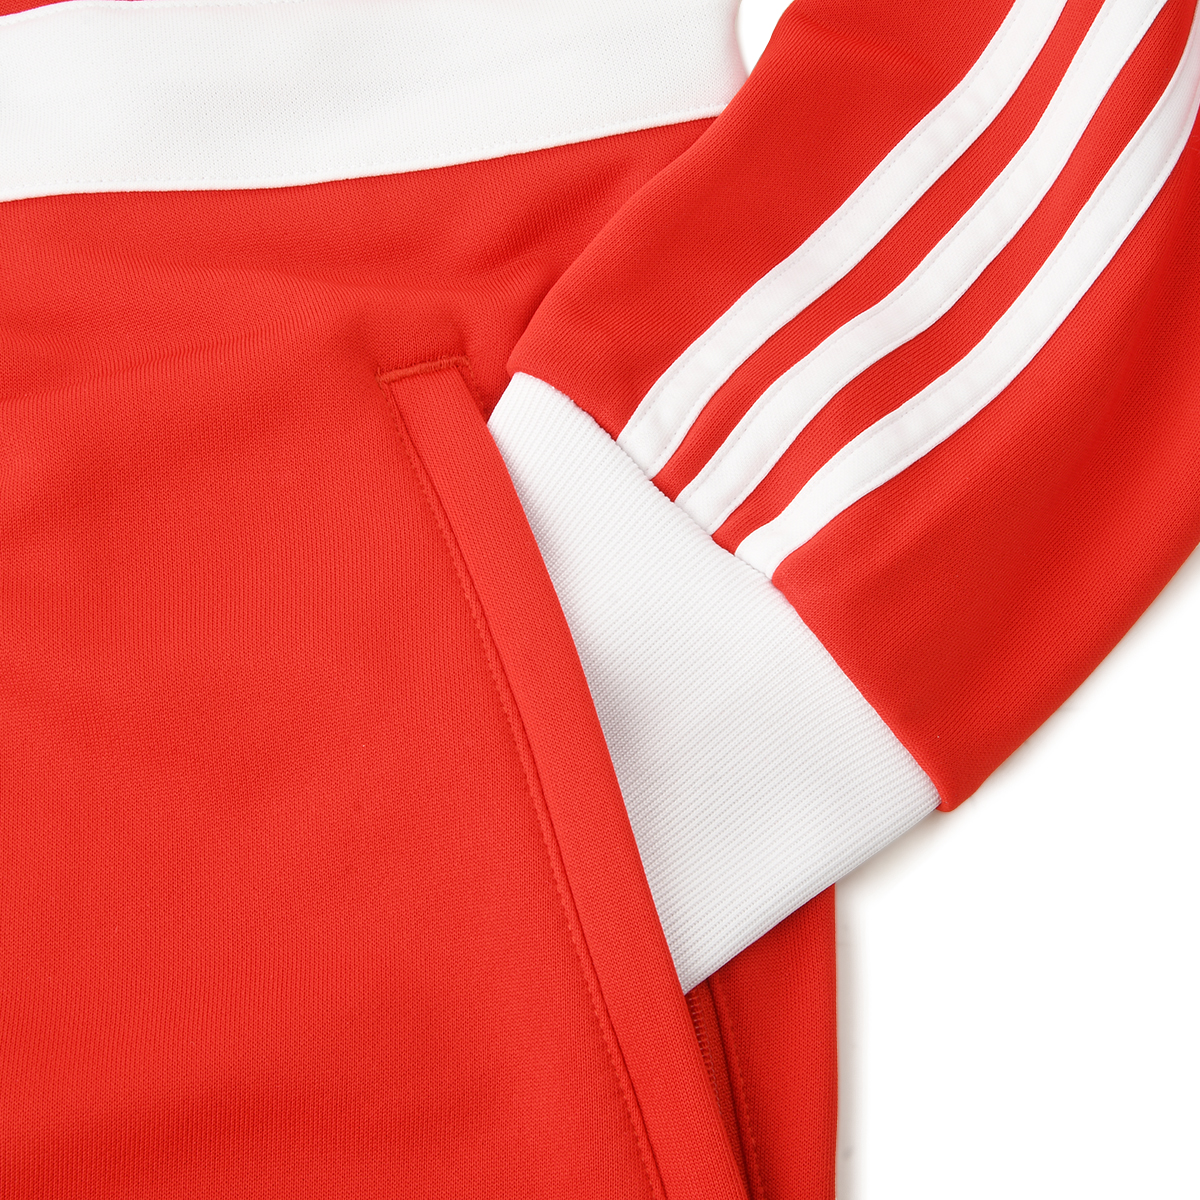 Campera Fútbol adidas River Plate 3 Stripes Hombre,  image number null